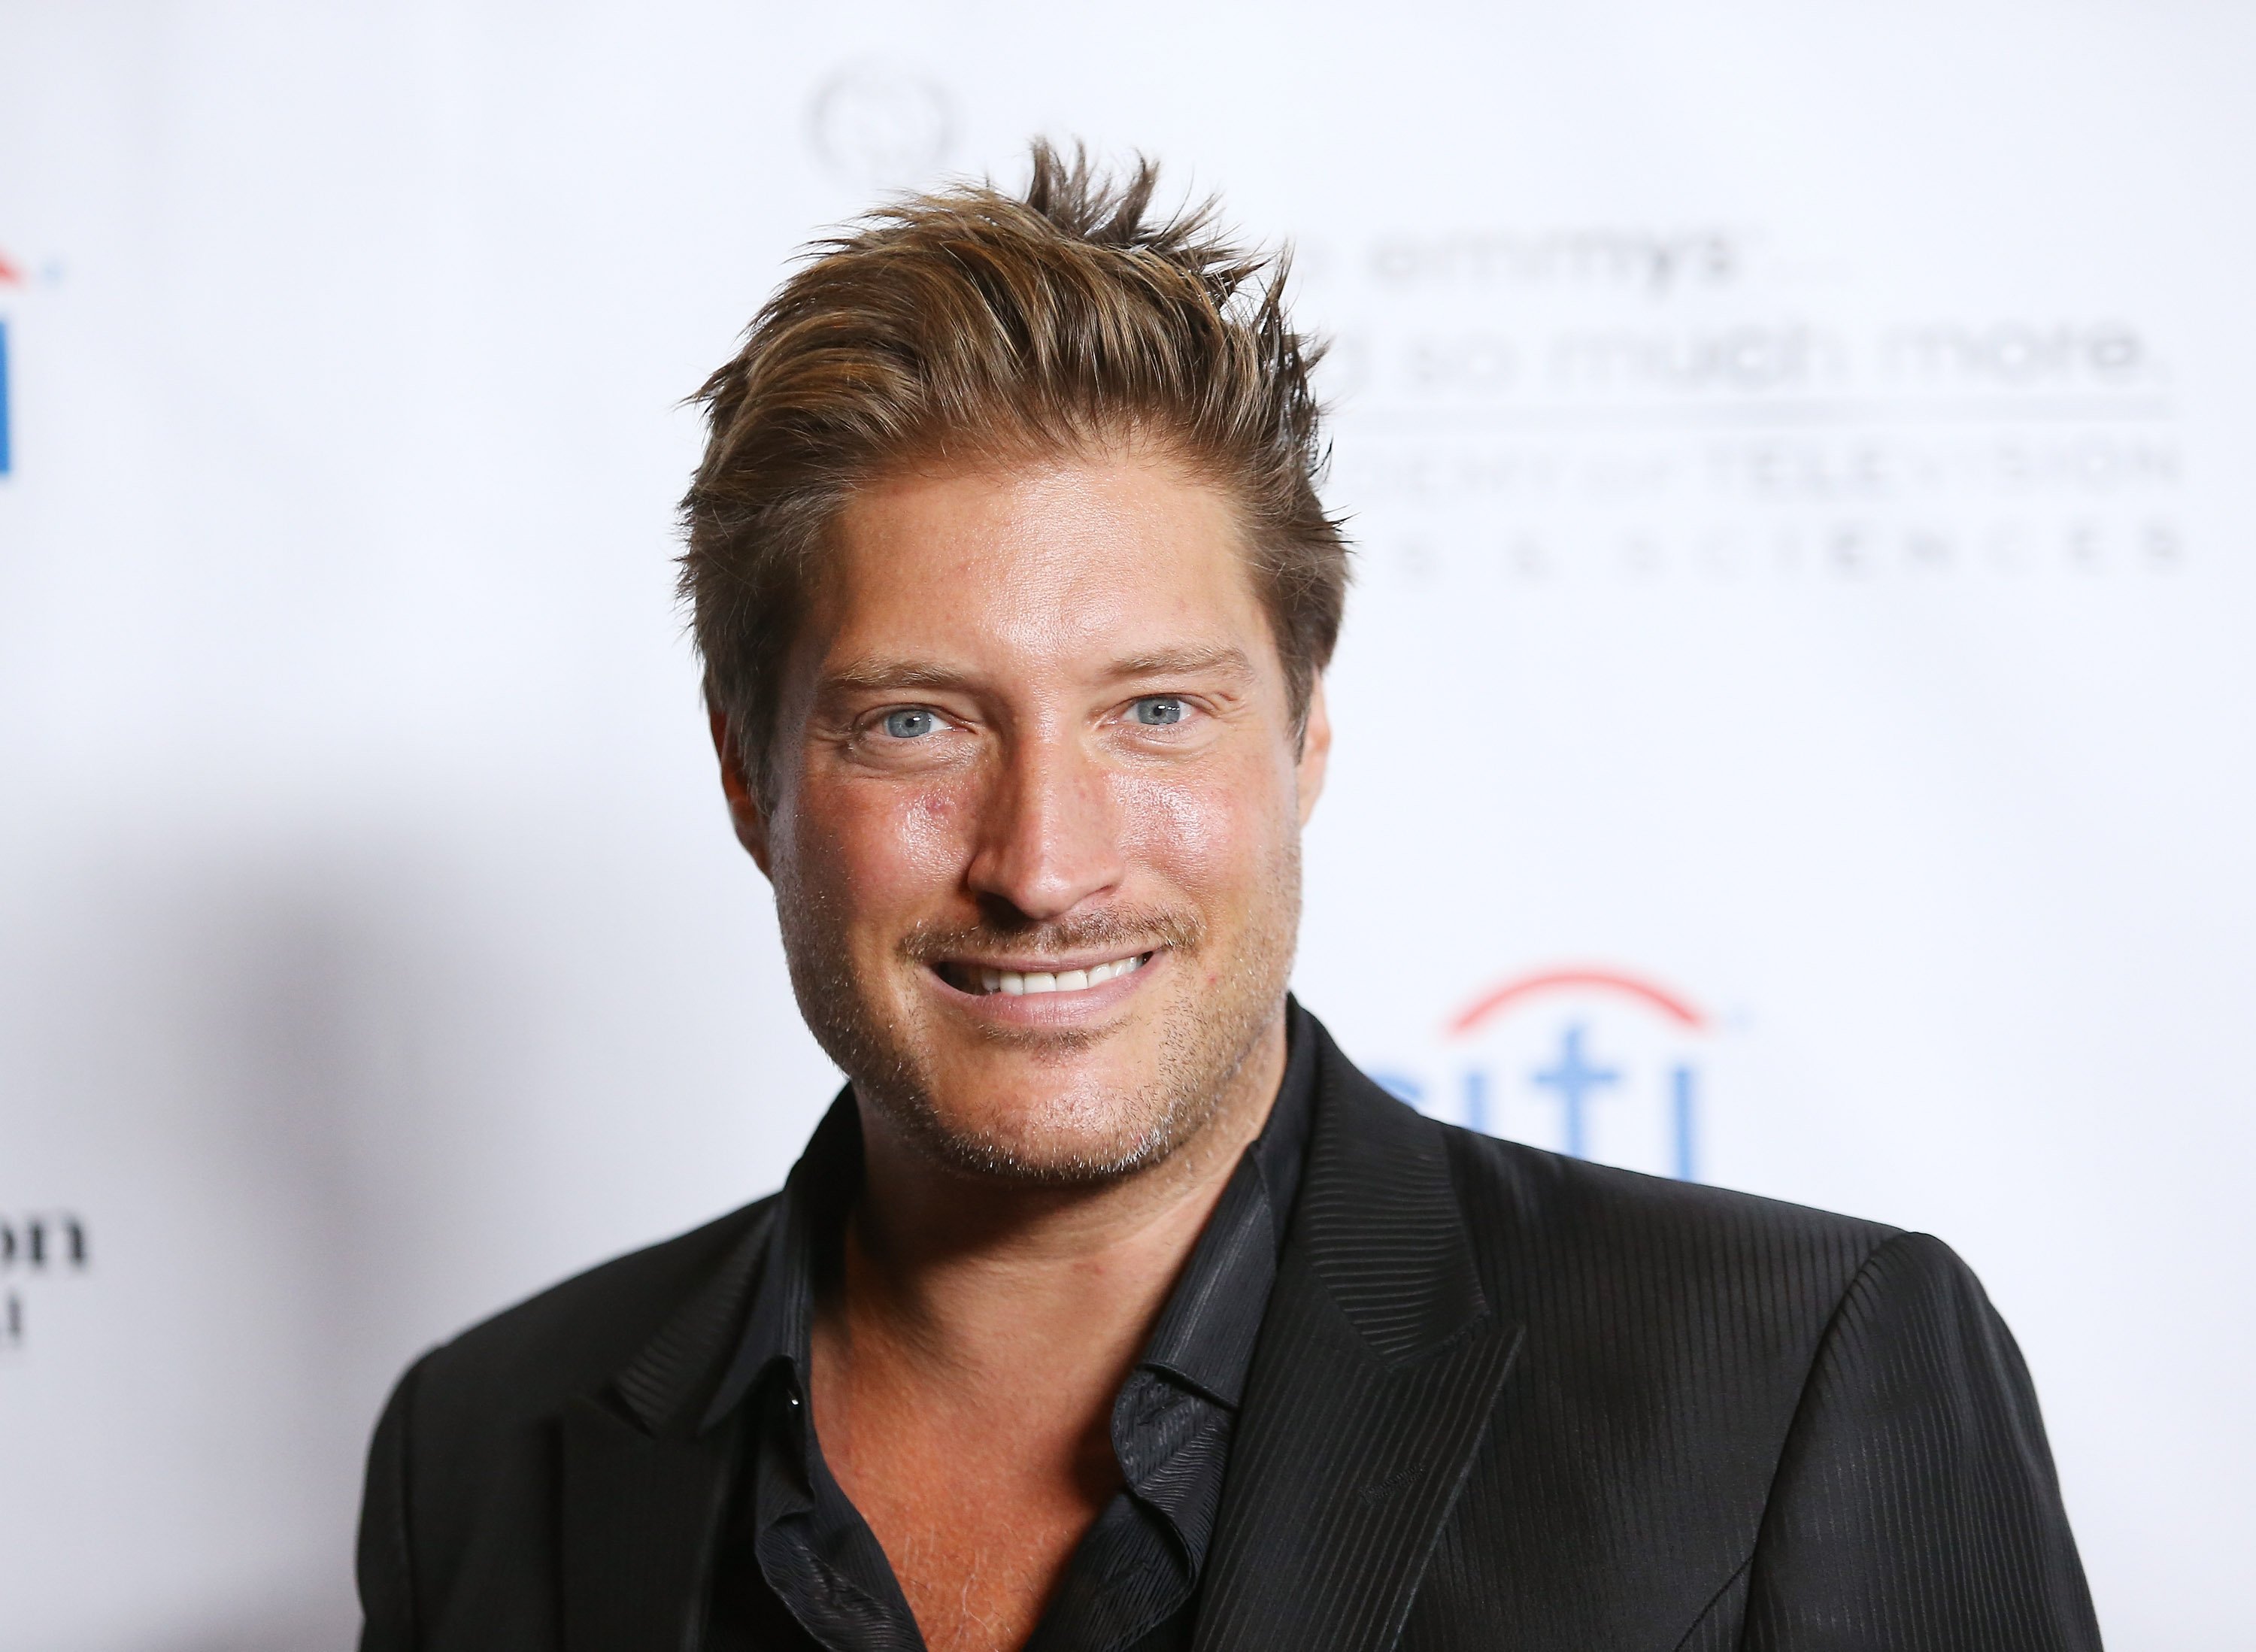 'The Bold and the Beautiful' actor Sean Kanan wearing a black shirt and suit, smiling for the camera.